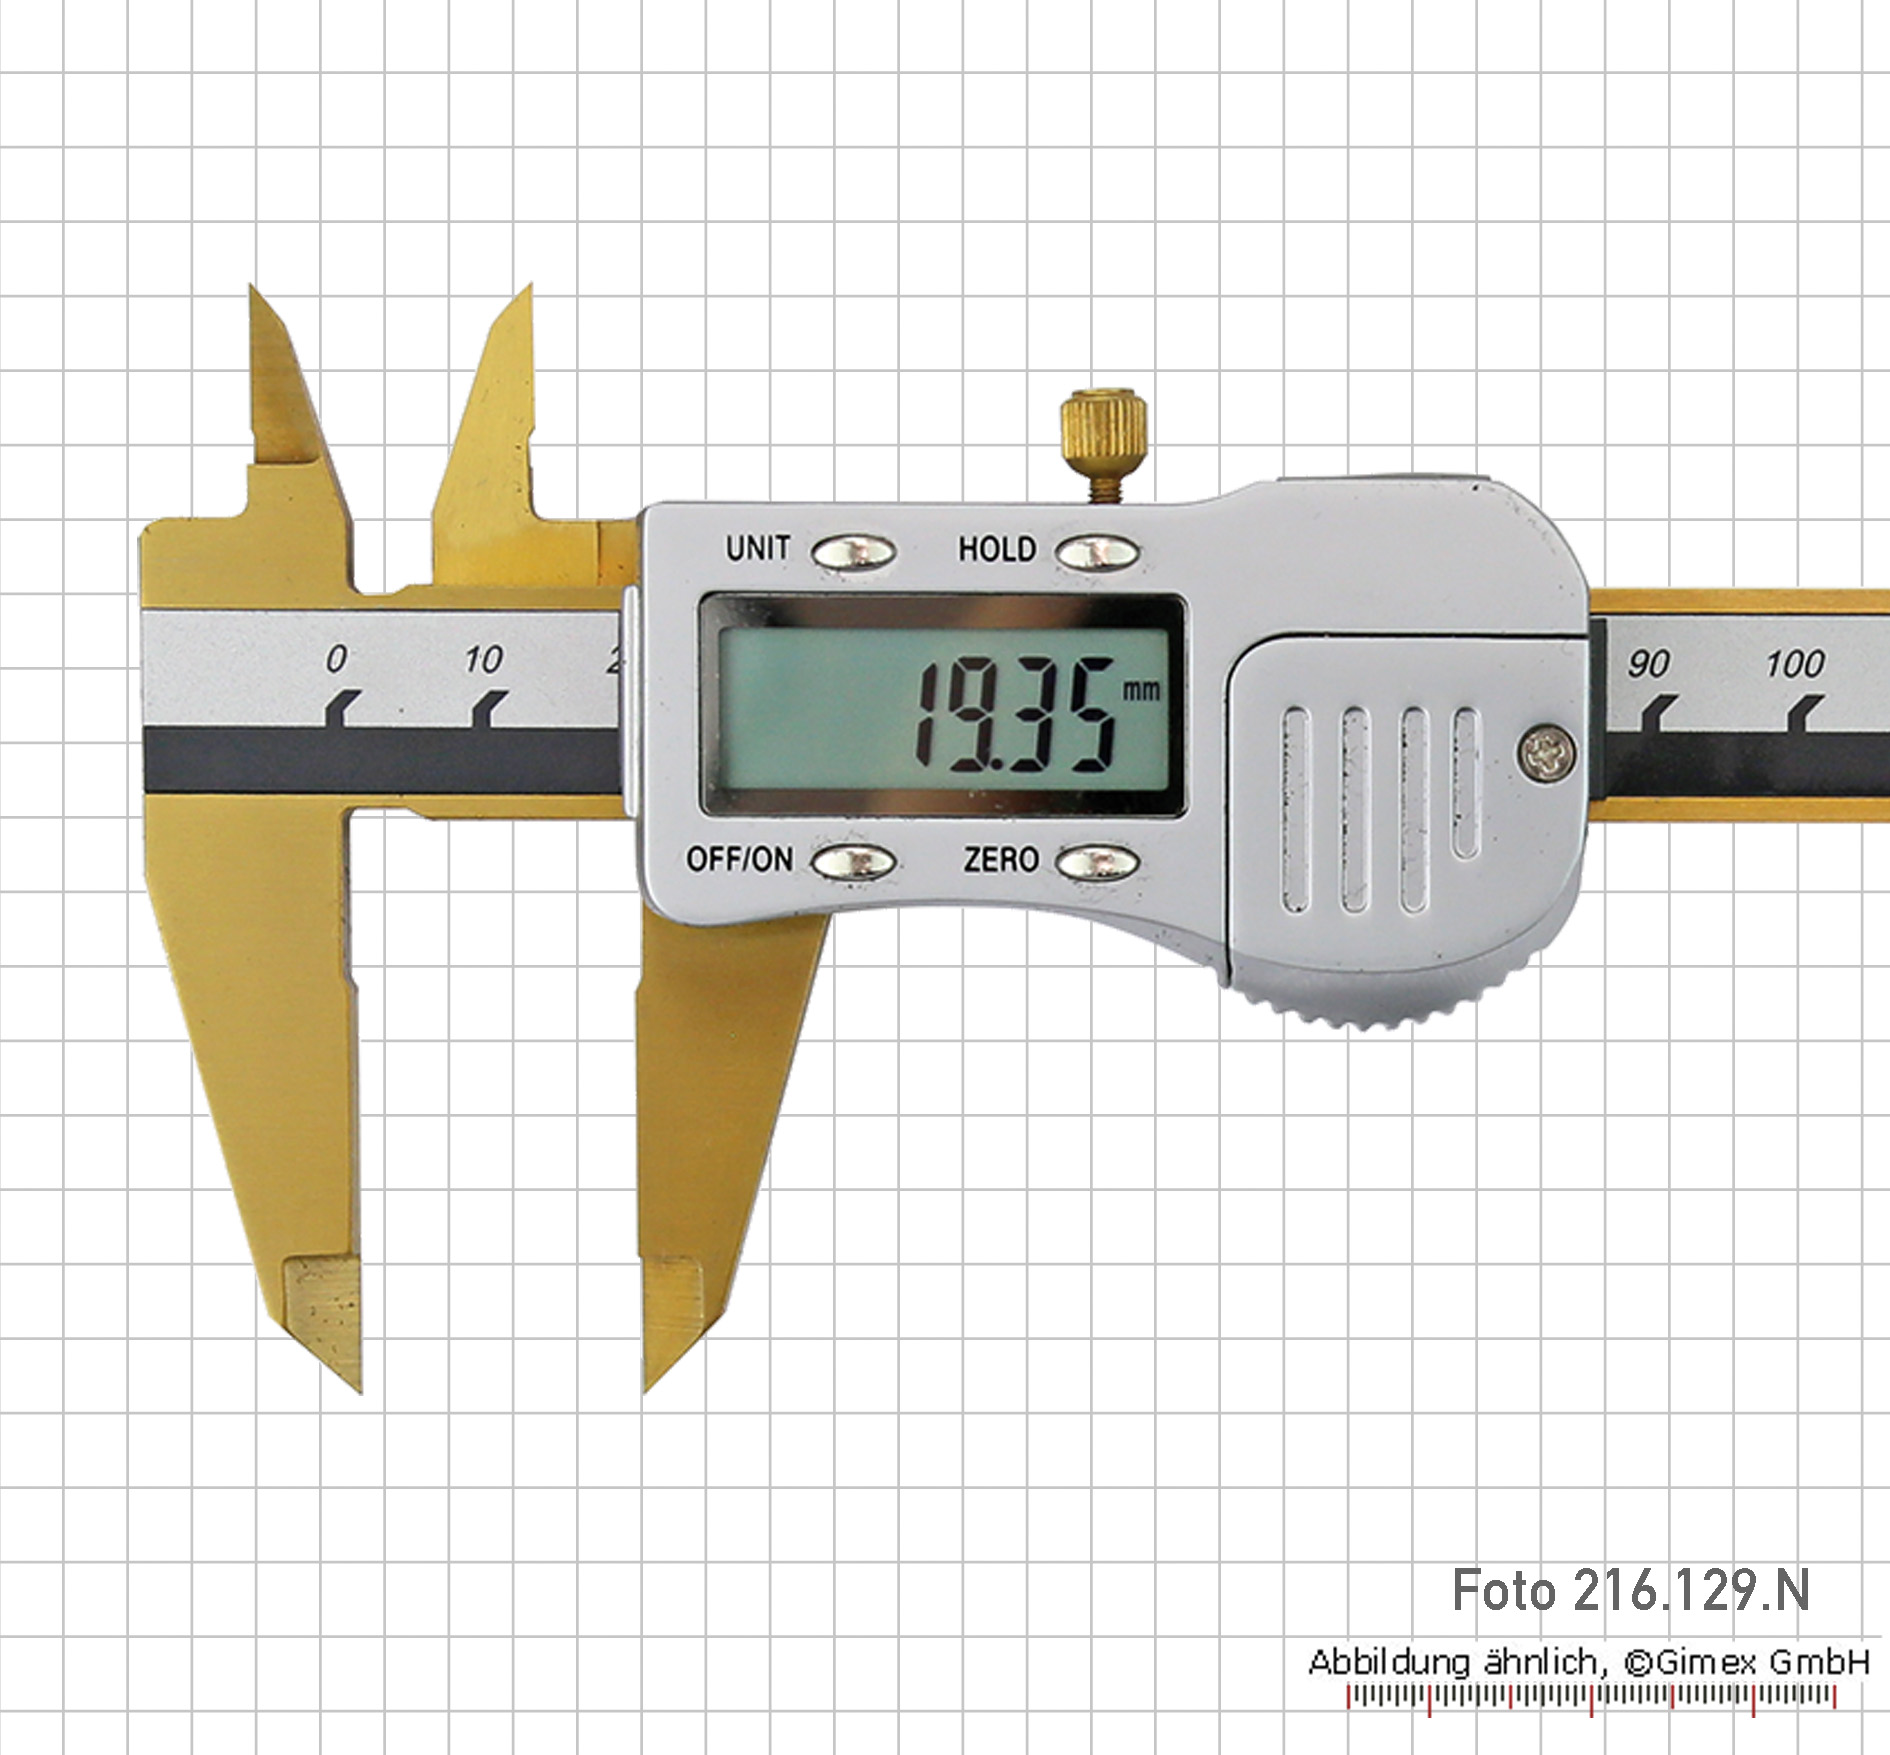 Simply buy Digital caliper ABS with data output 150 mm